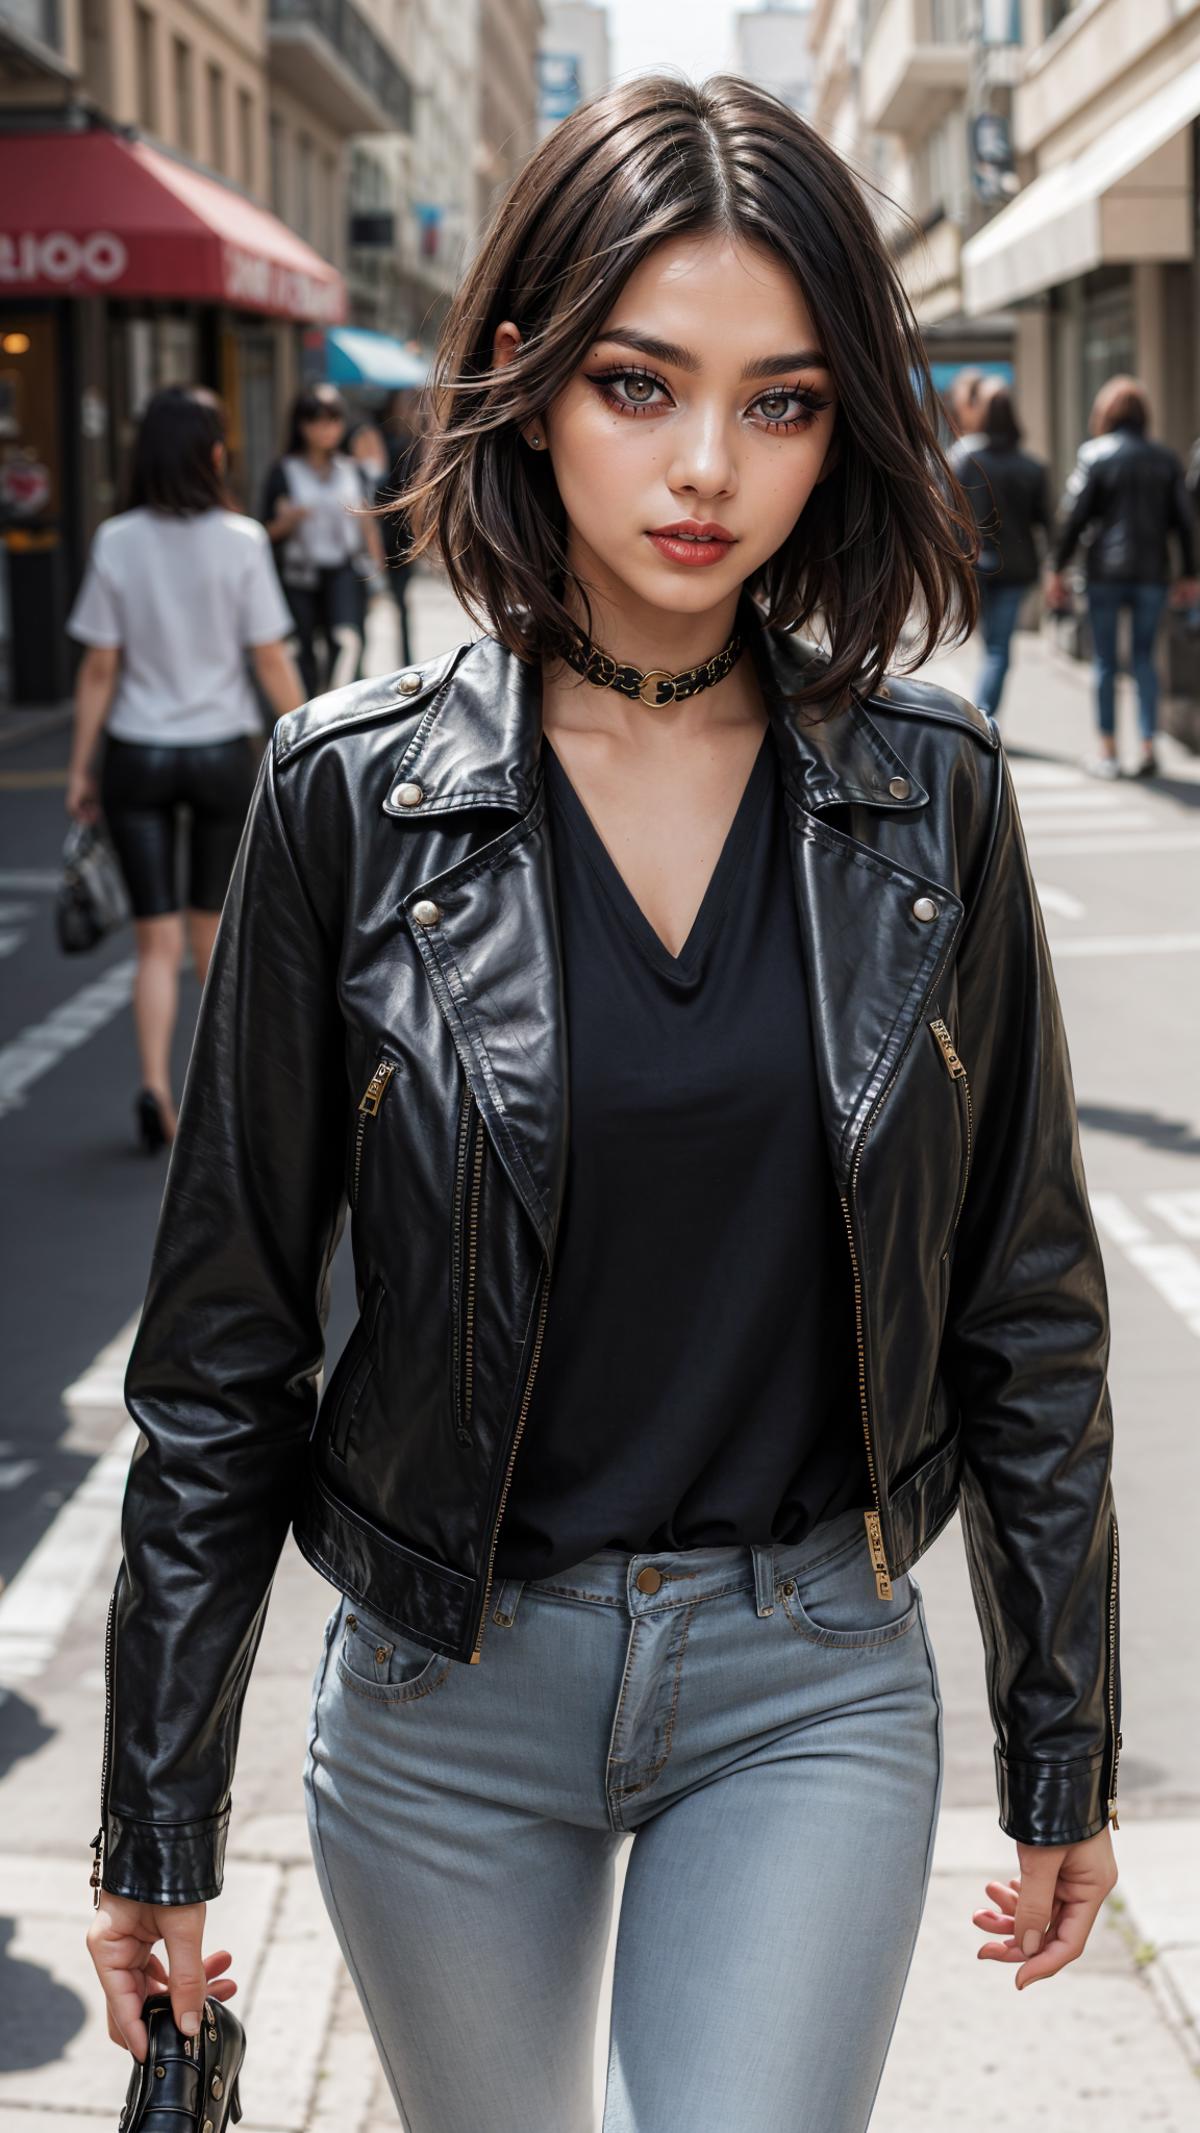 A woman in a black leather jacket and jeans walking on the street.